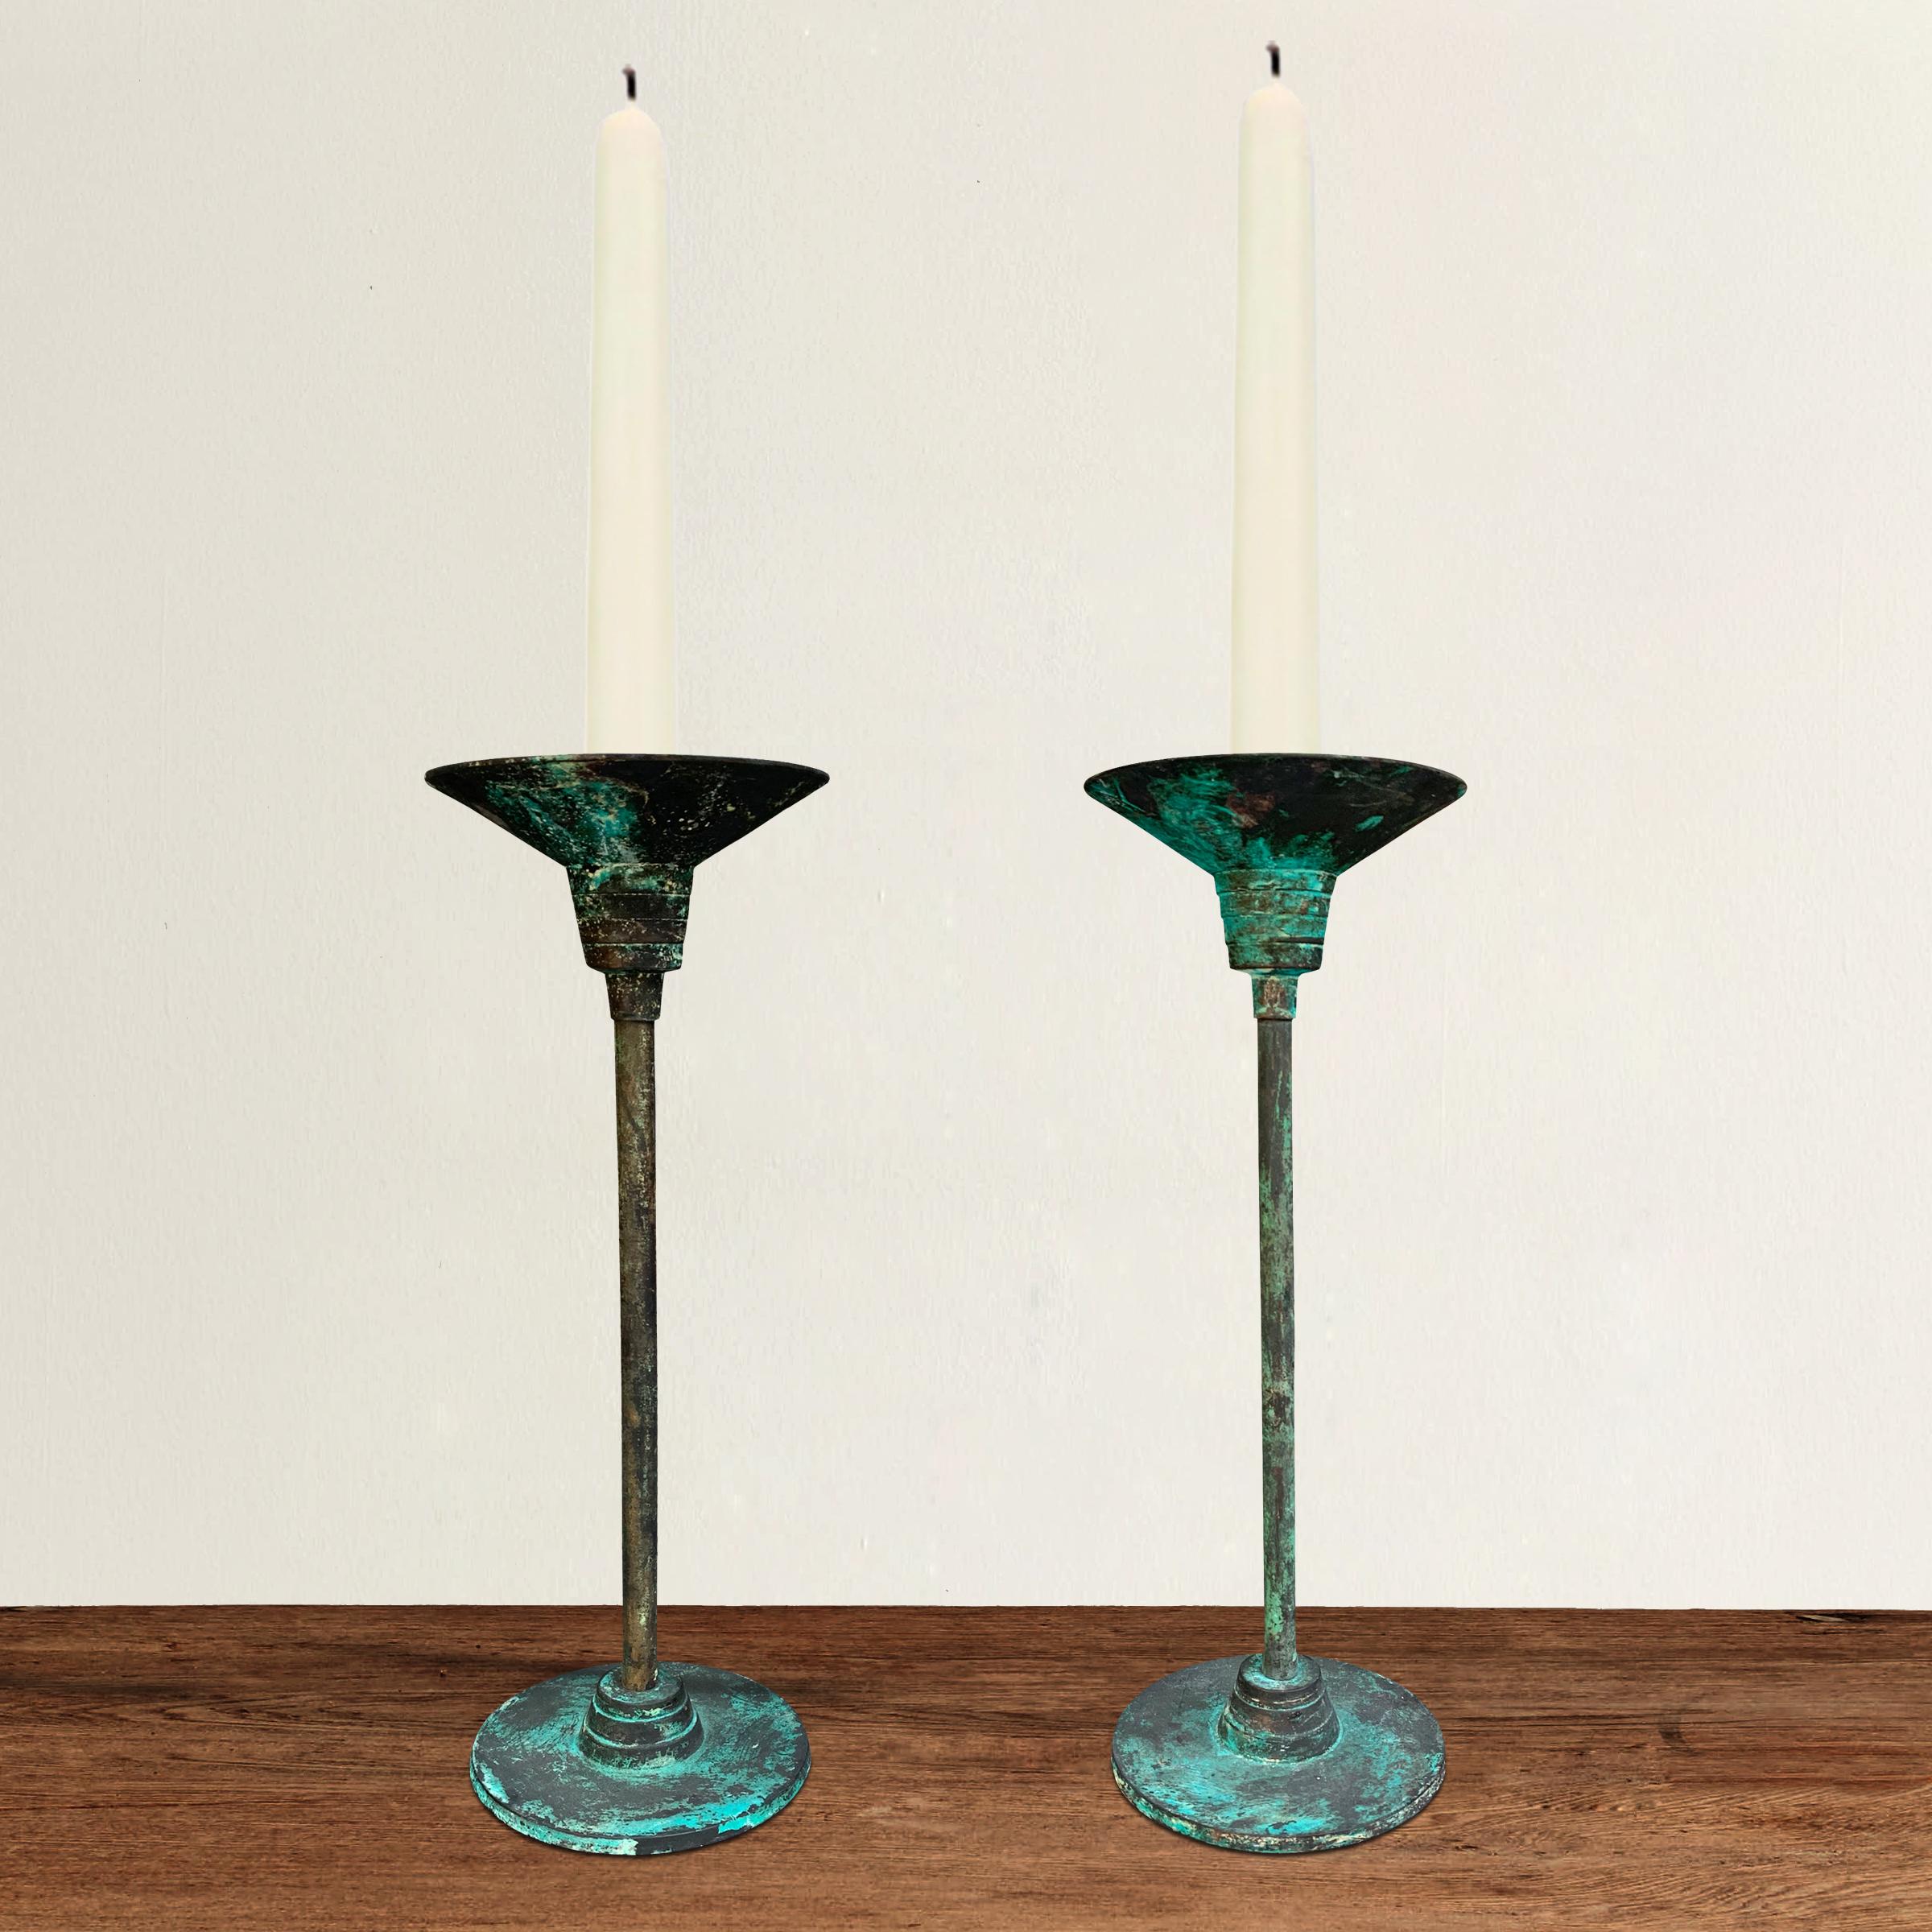 A pair of vintage bronze candlesticks with a fantastic neoclassical Roman form with a wonderful rich verdigris finish covering the entirety of each piece. Beautiful in any style interior!